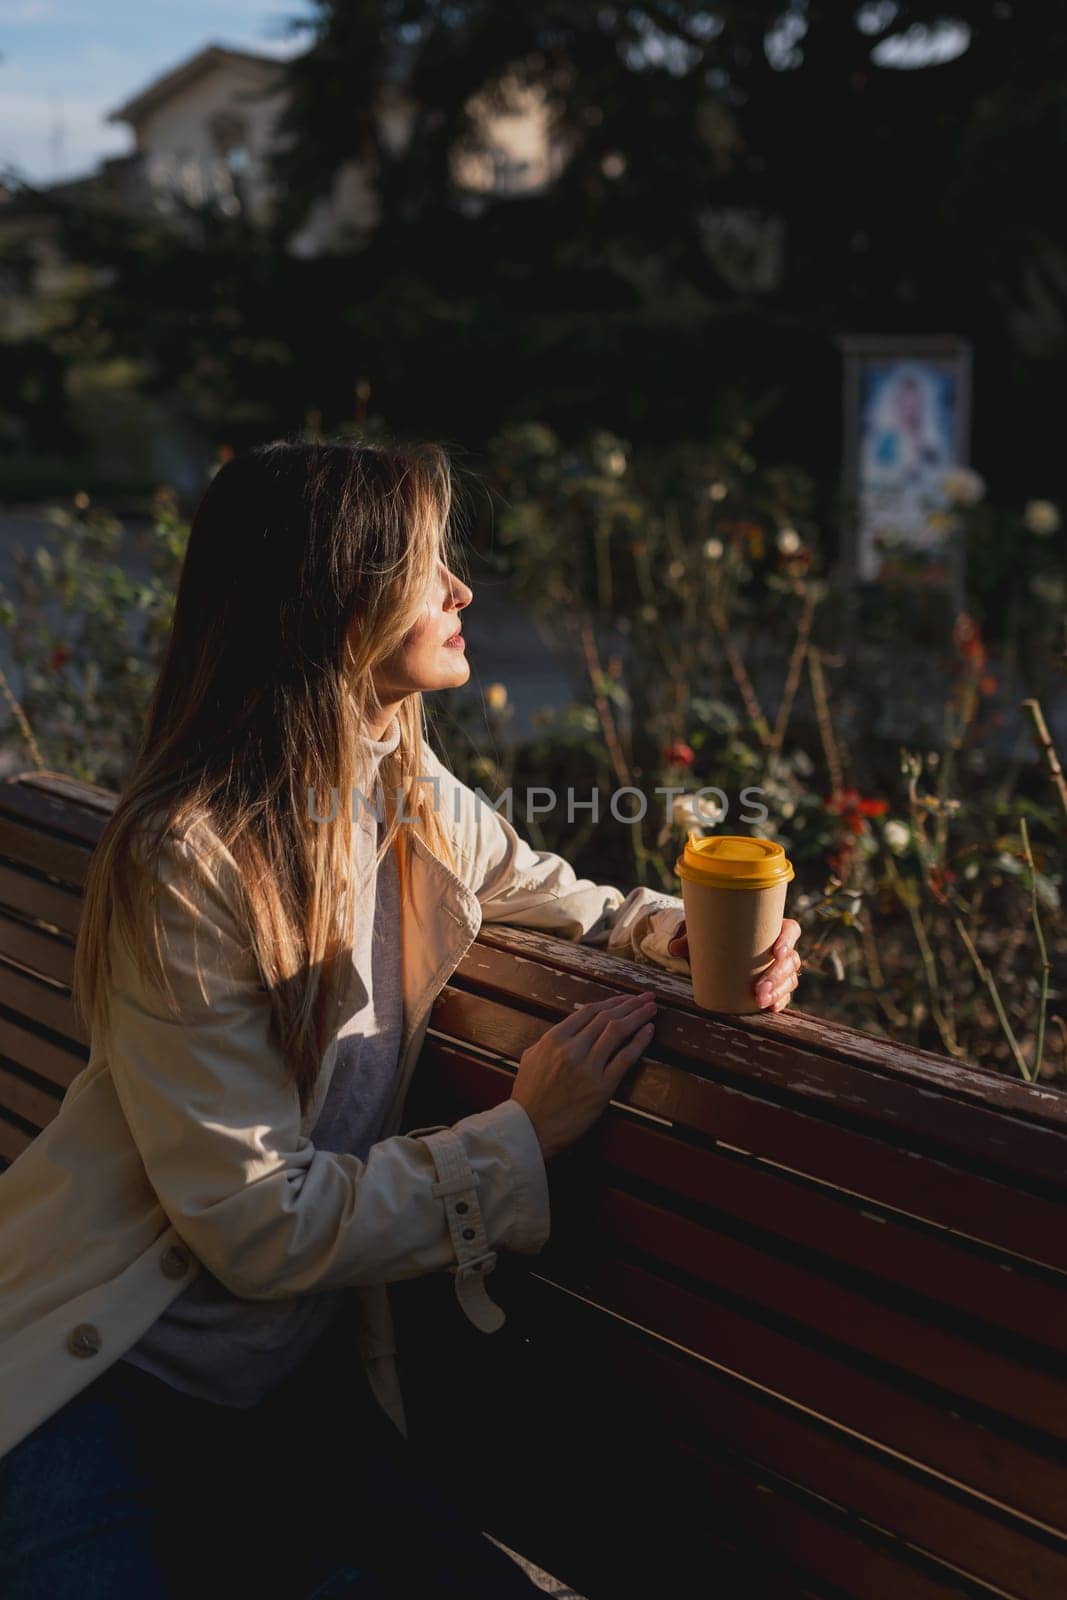 Woman drinks from cup on wooden bench. She is wearing a white shirt enjoying her beverage. The bench is located in a park setting, with trees in the background. by Matiunina